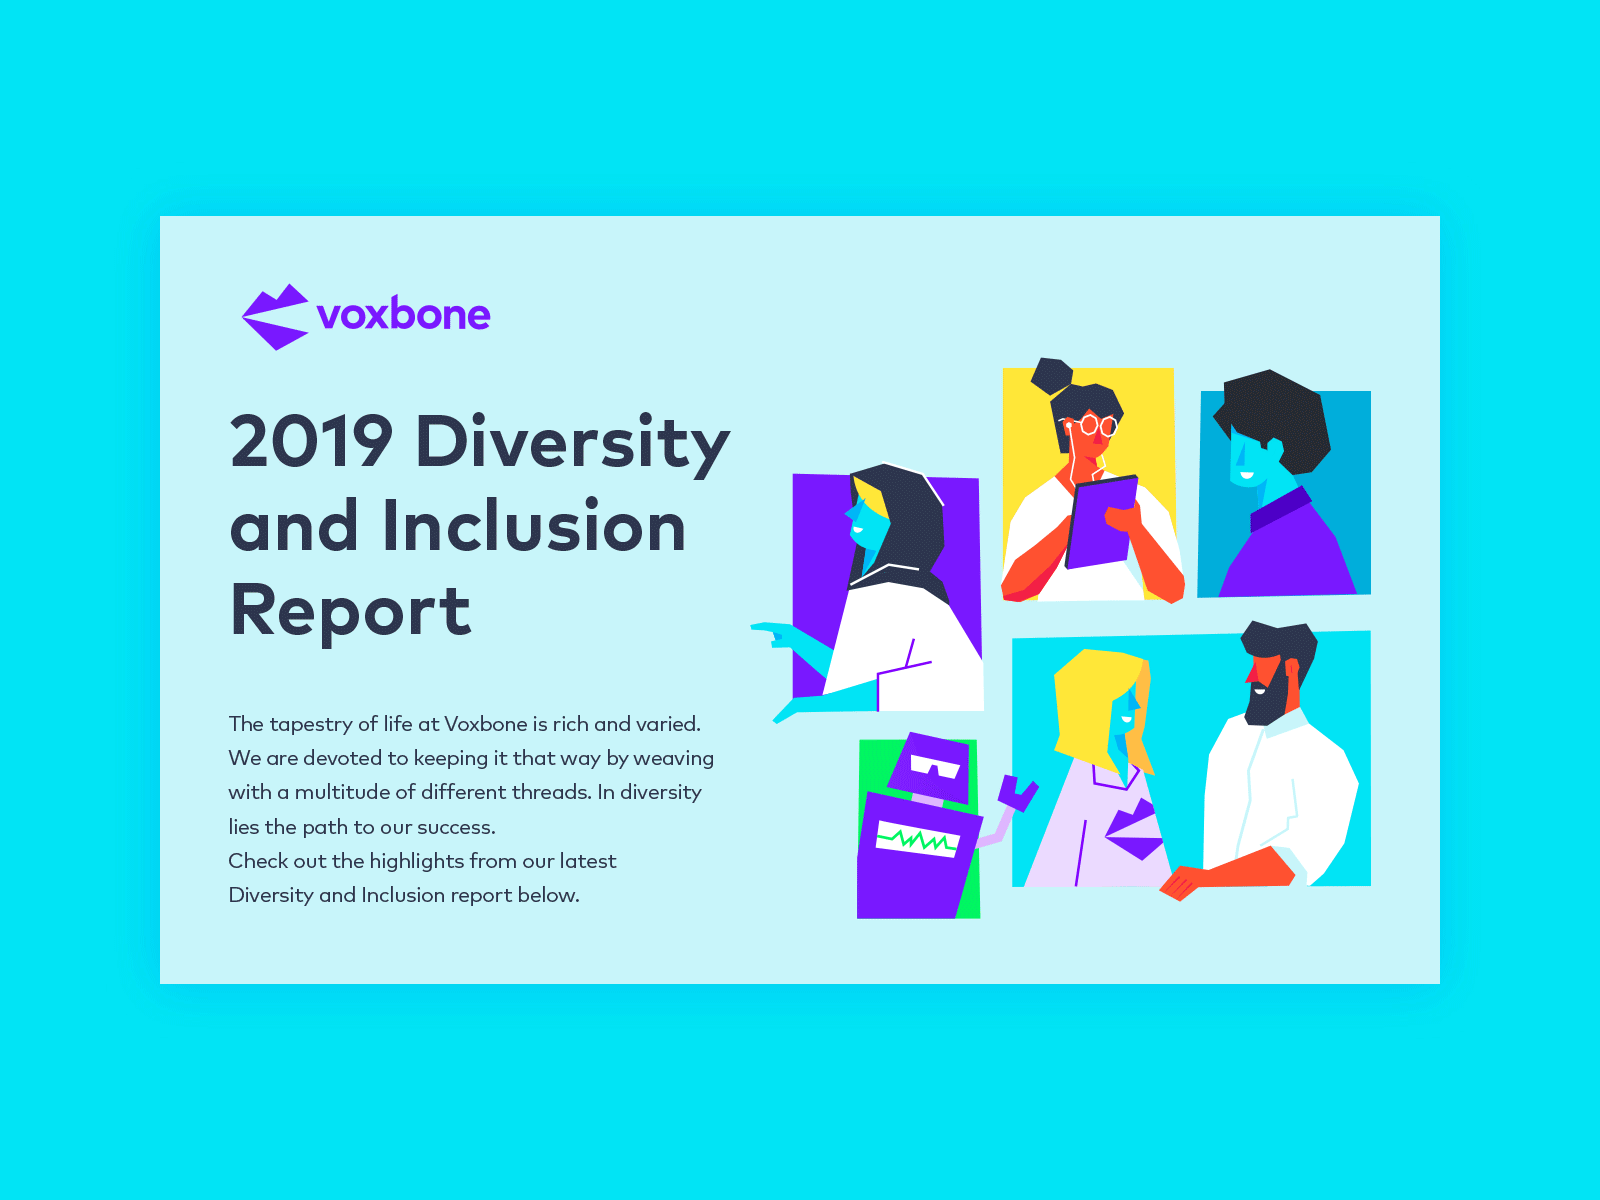 Voxbone 2019 Diversity and Inclusion Report business character communication corporate culture design diversity human illustration inclusion infographic vector work